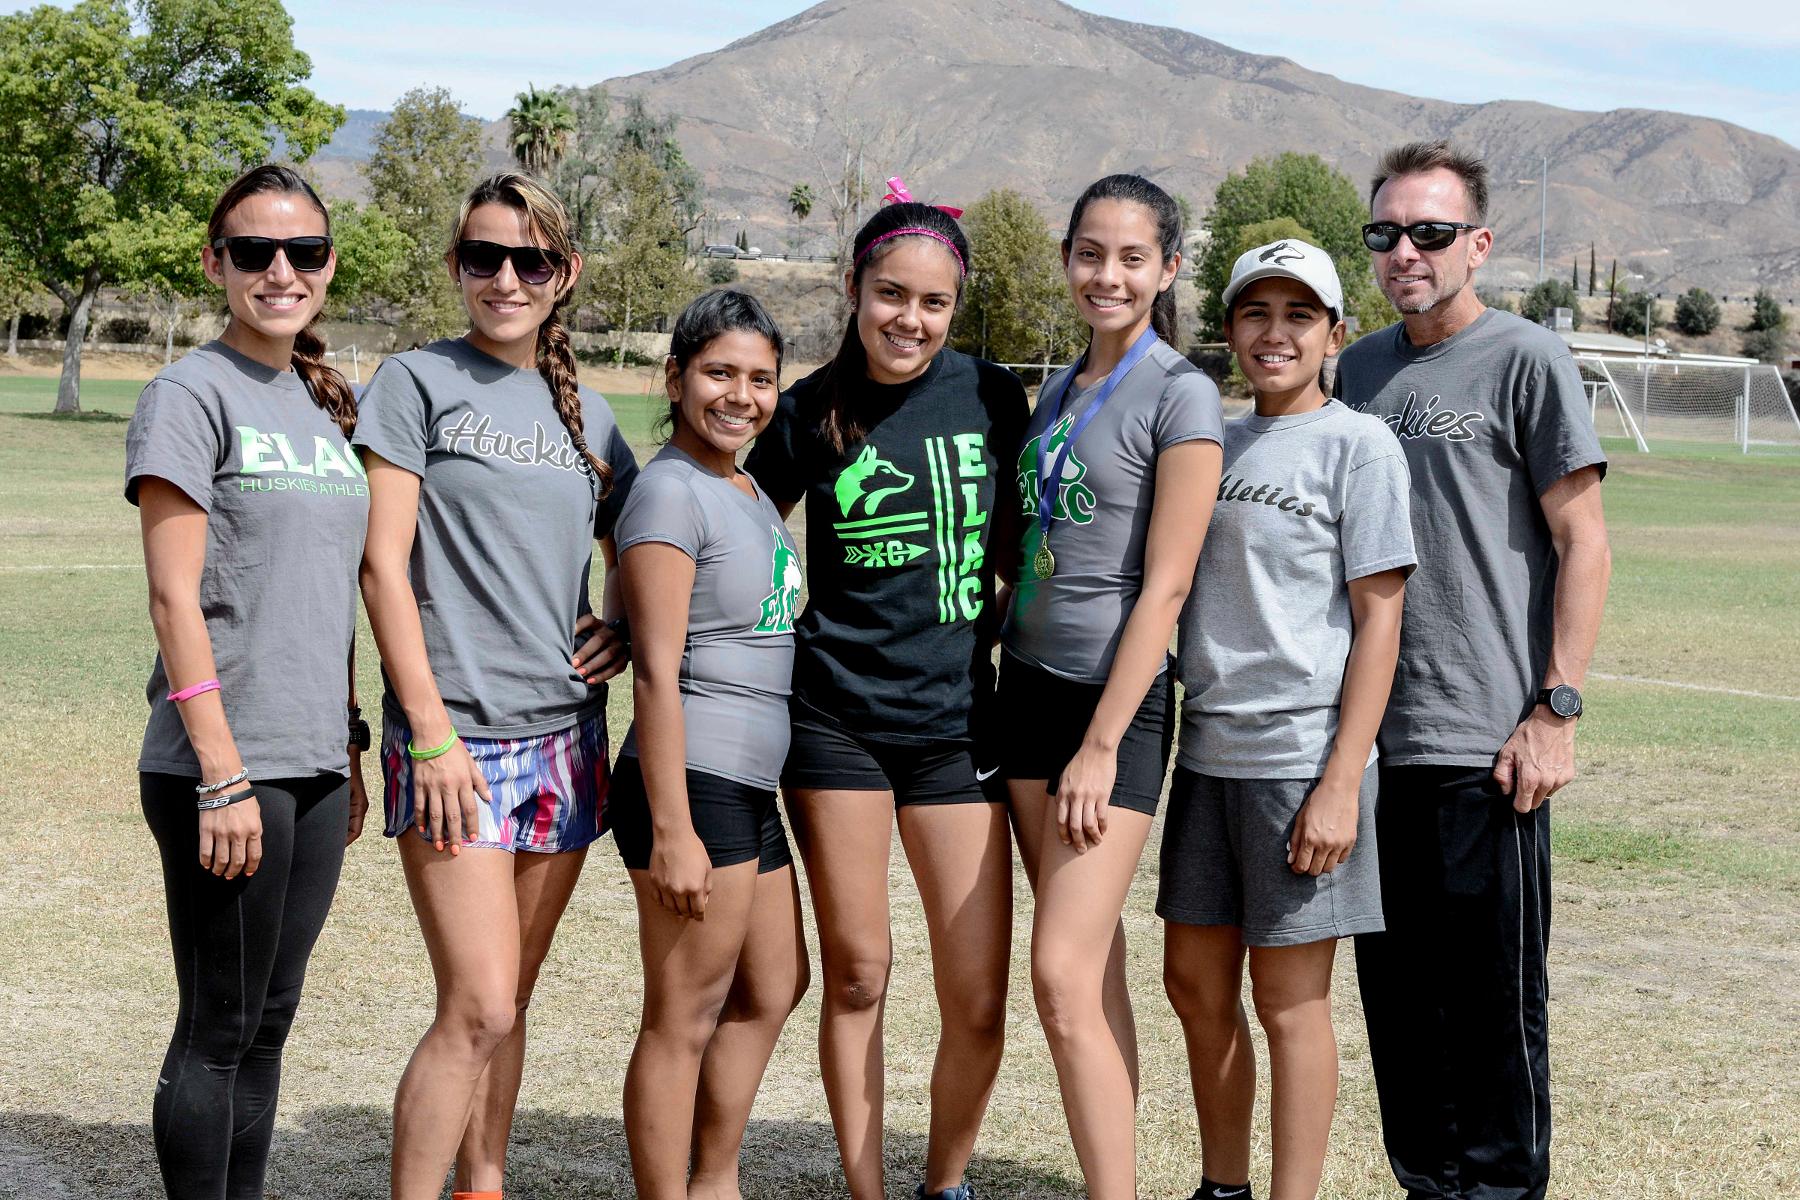 The women's cross country team and coaches pose for a photo in San Bernardino. (Photo by Tadzio Garcia)